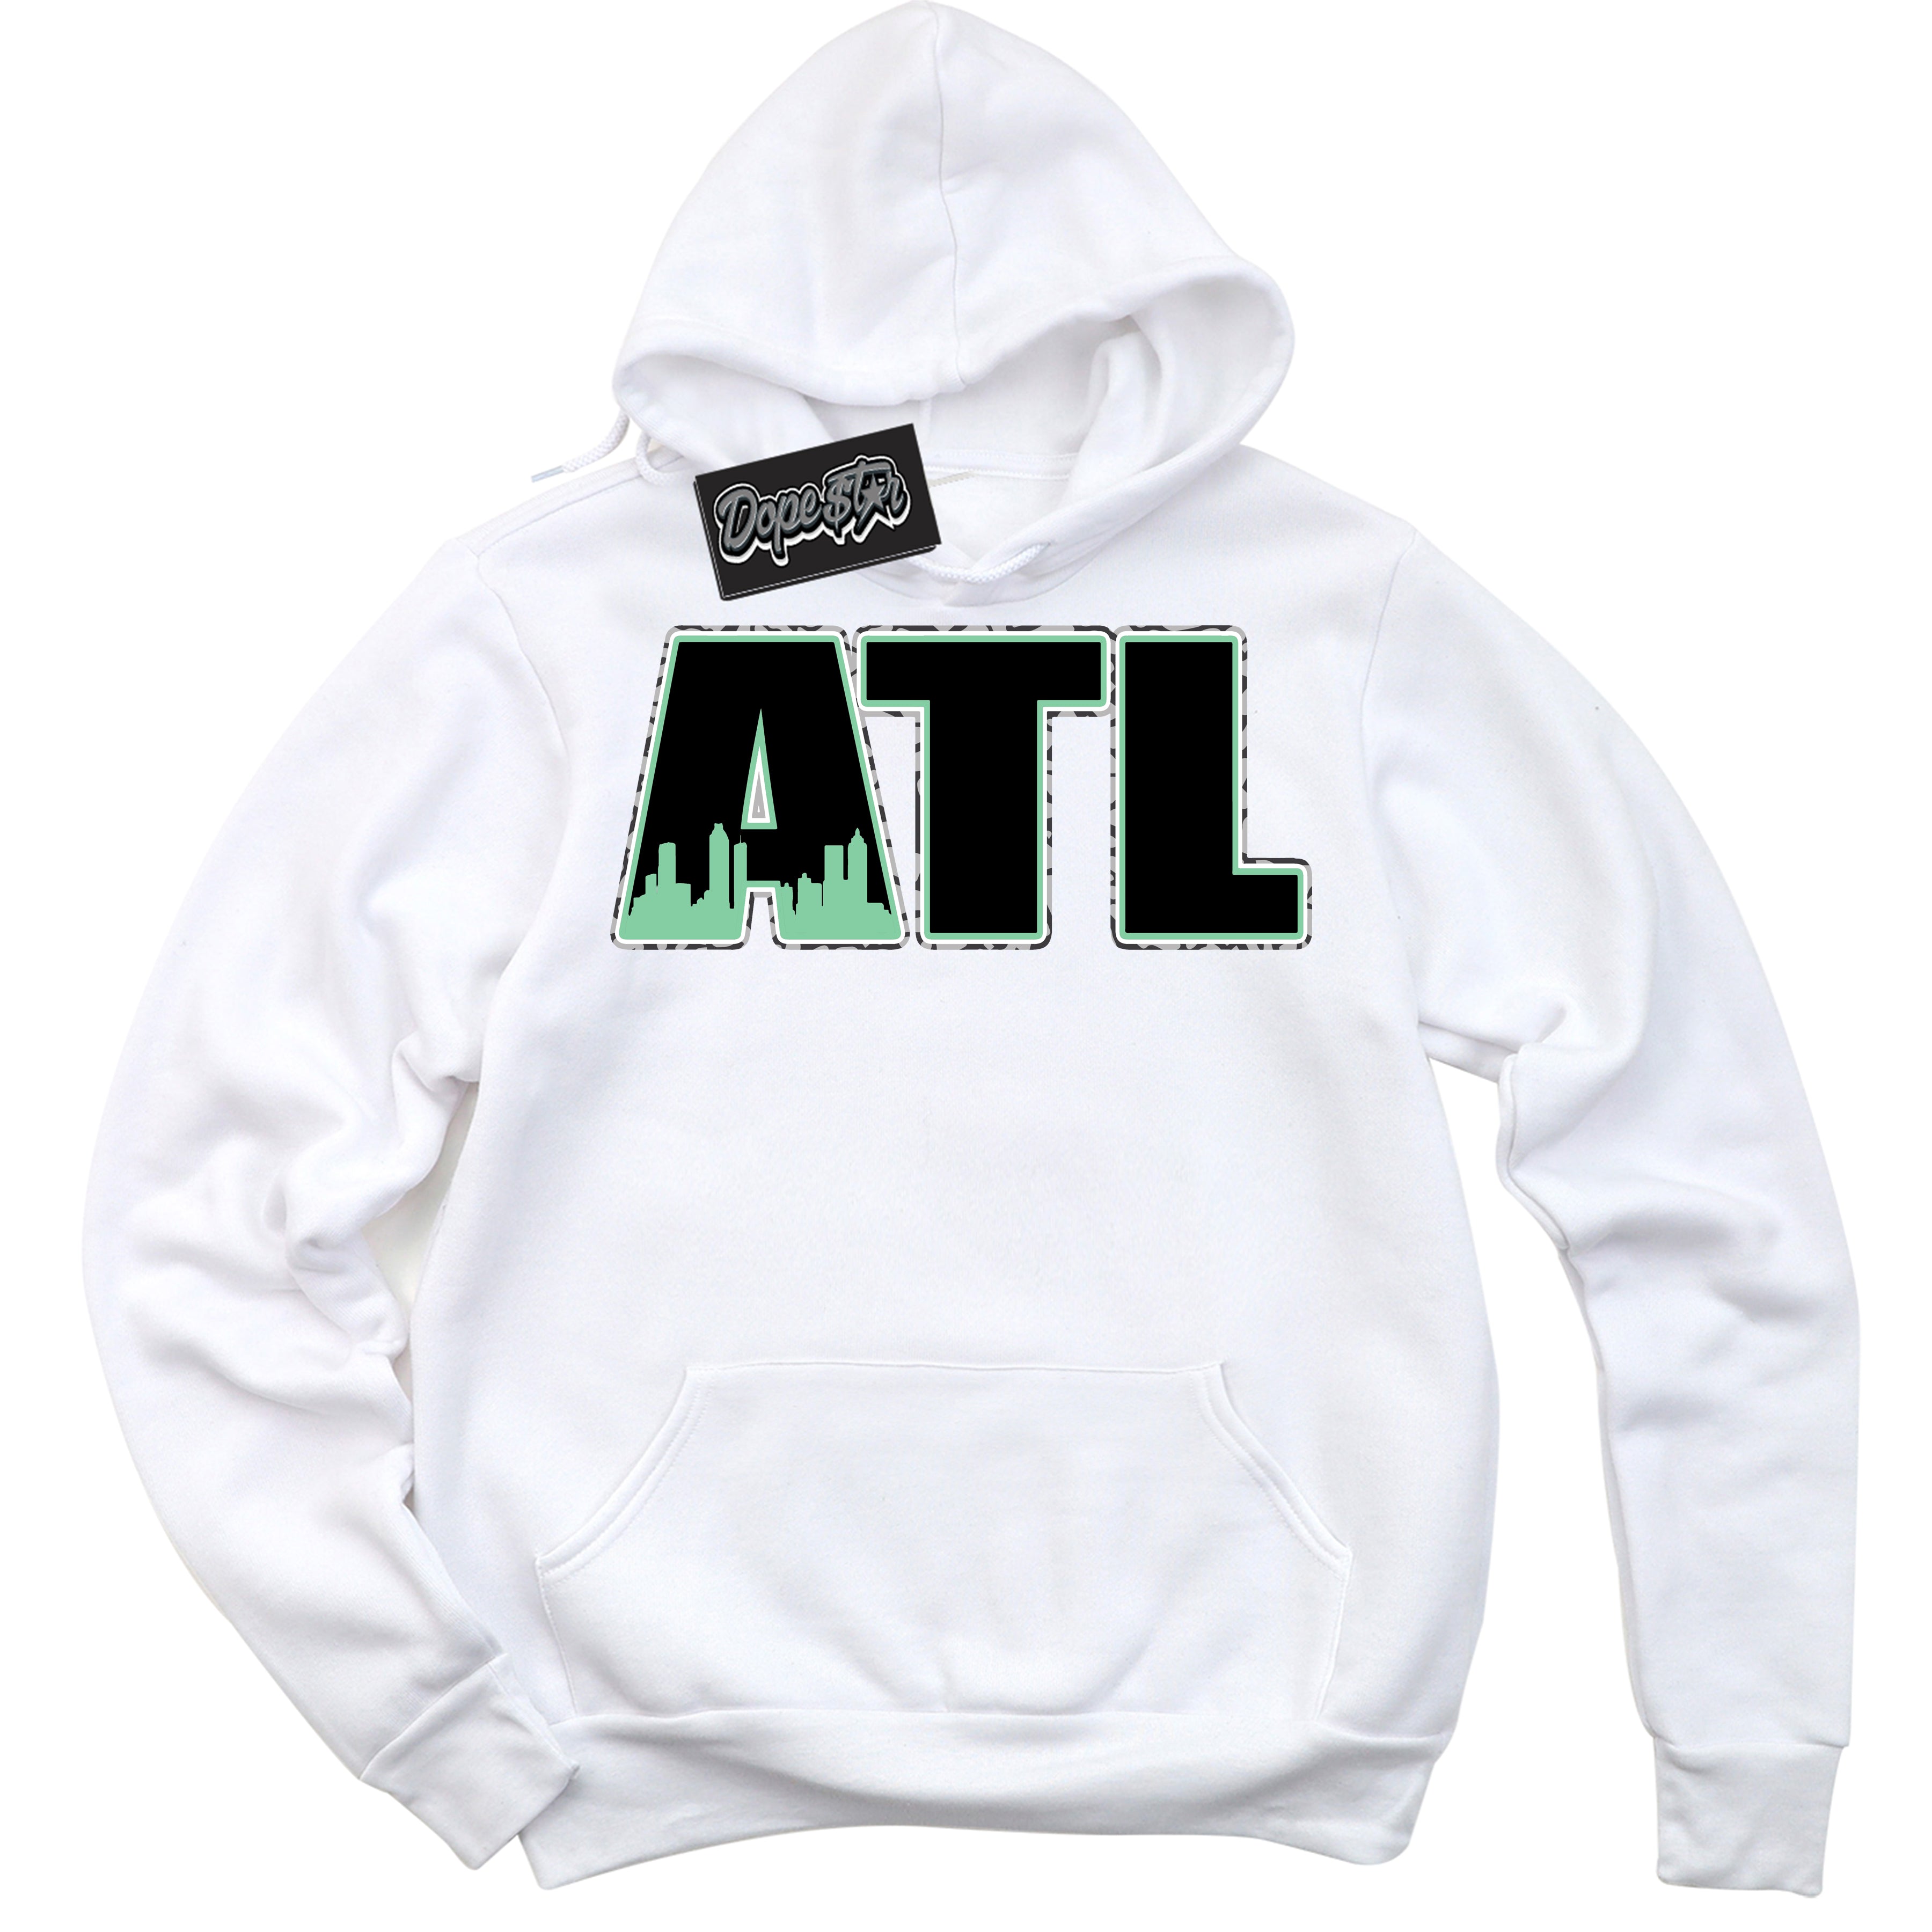 Cool White Graphic DopeStar Hoodie with “ Atlanta “ print, that perfectly matches Green Glow 3s sneakers